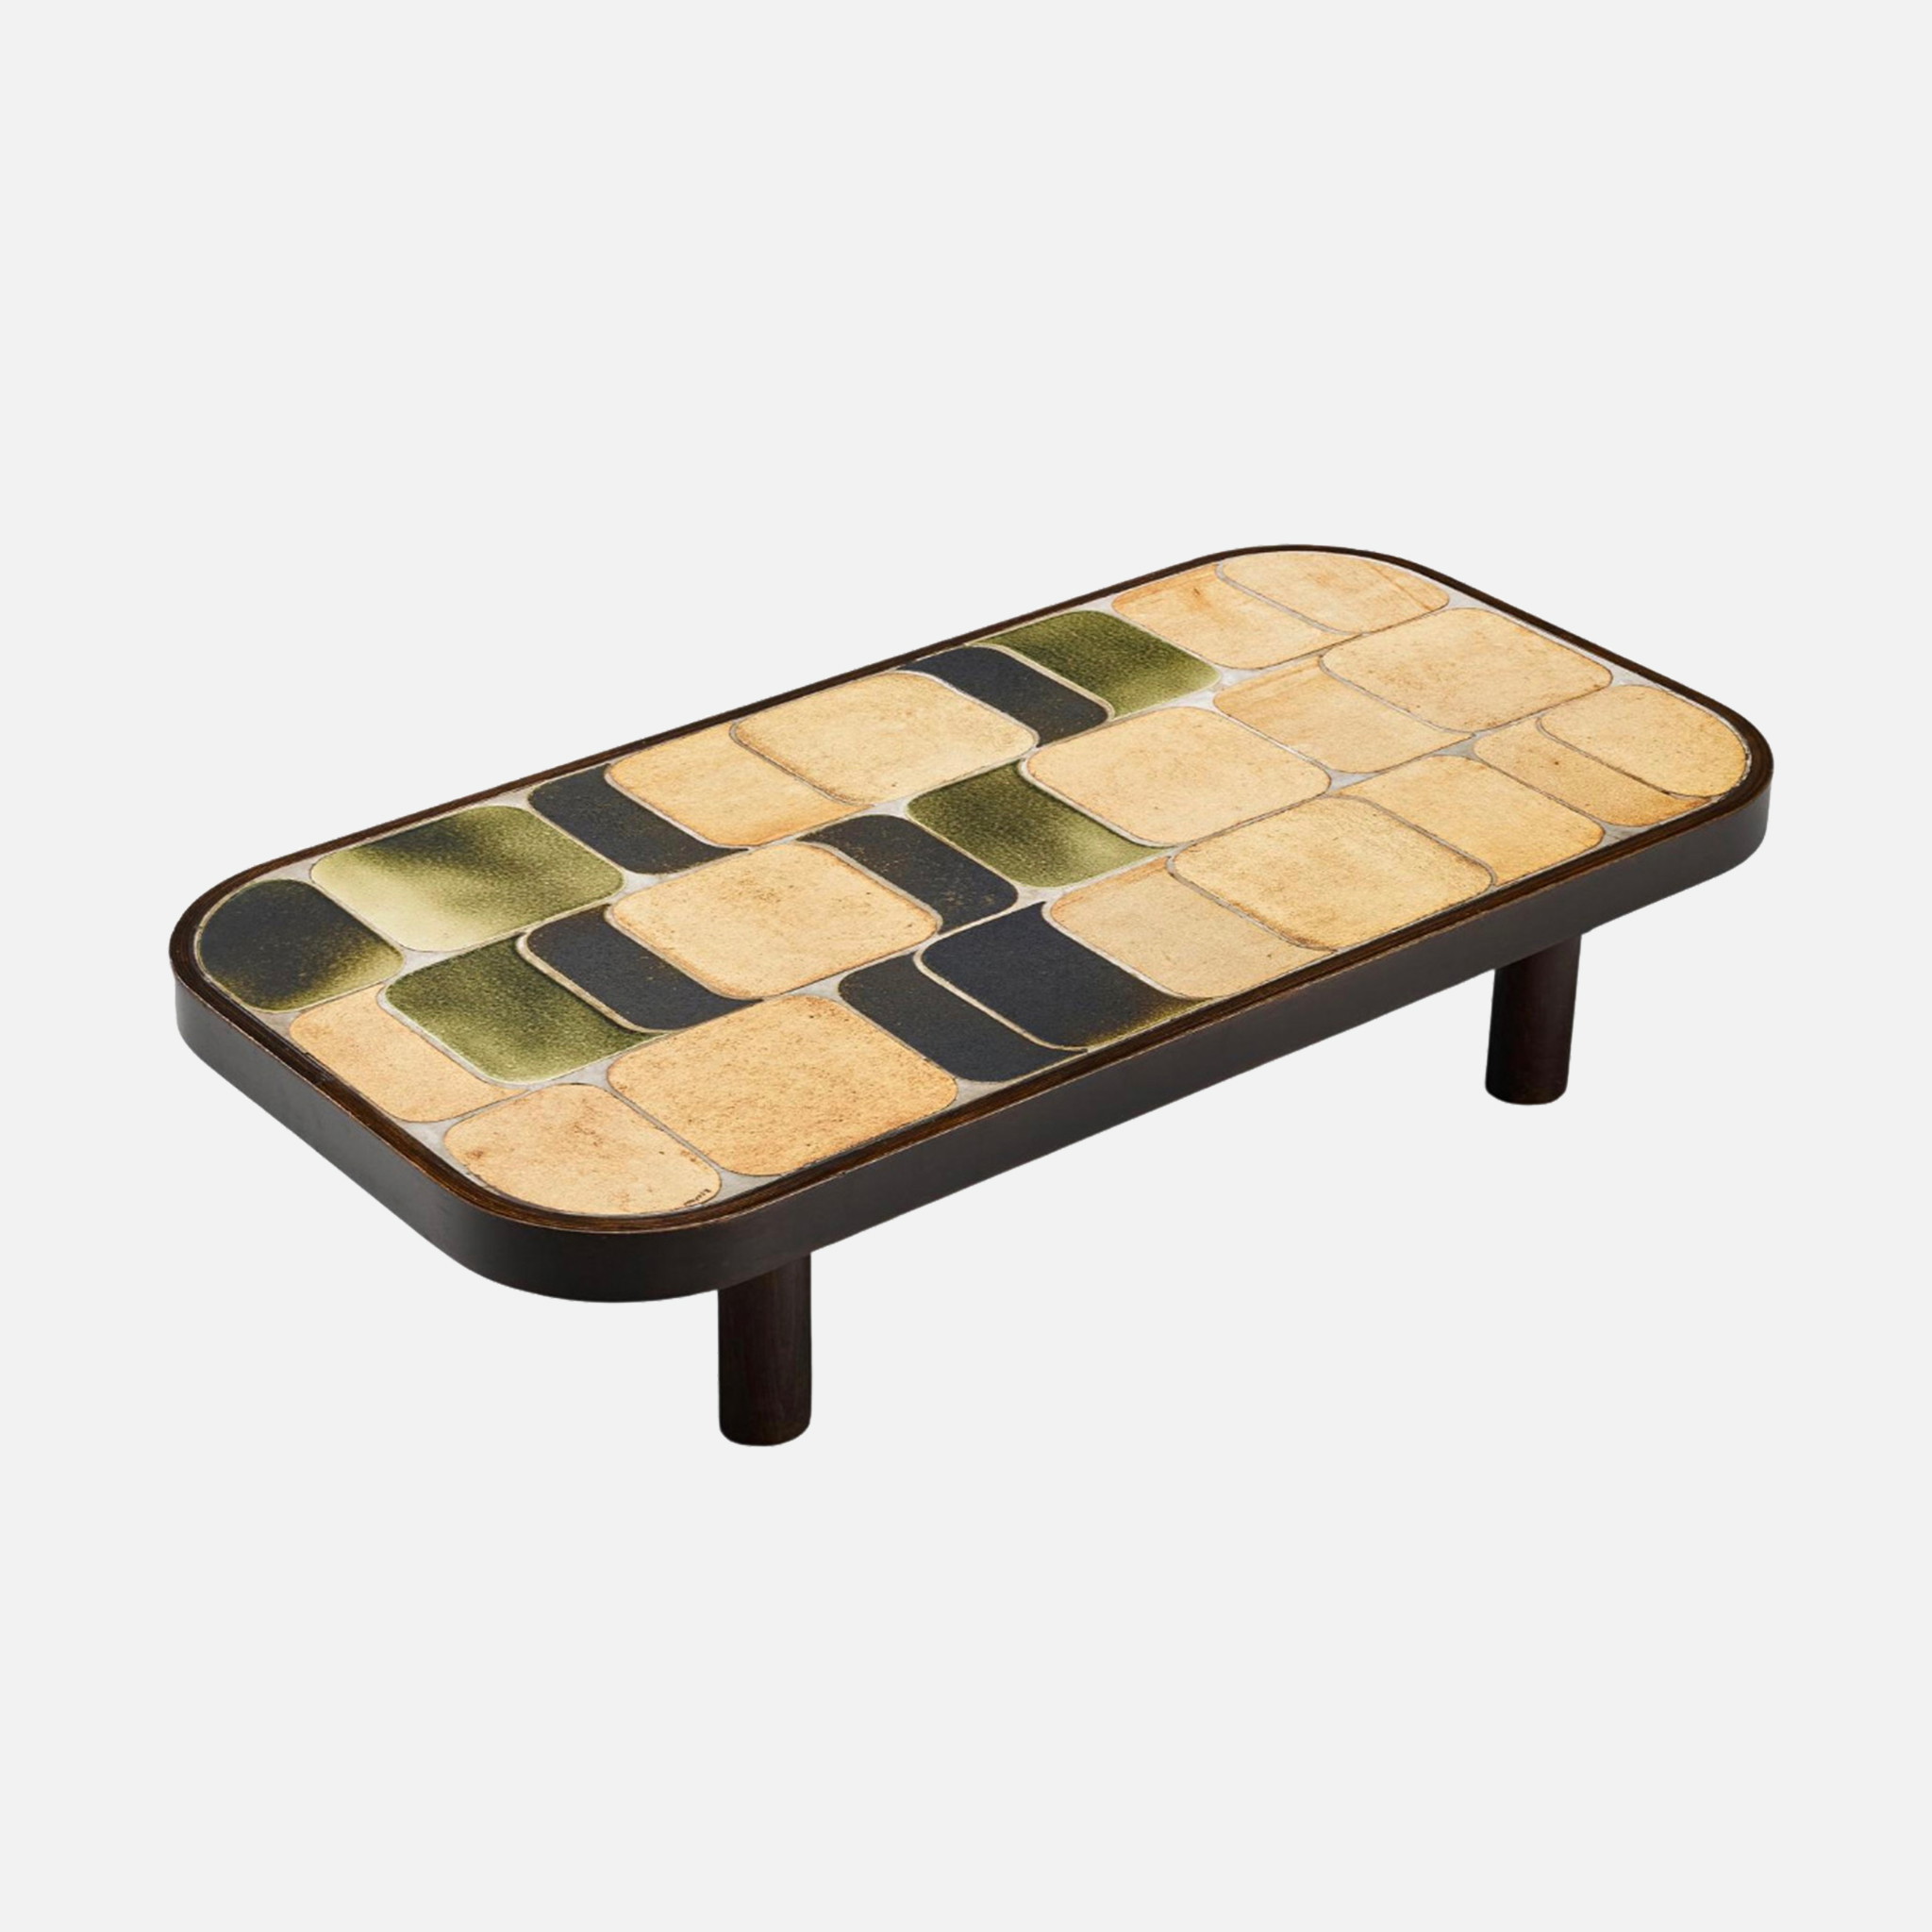 a wooden table with a tile design on it